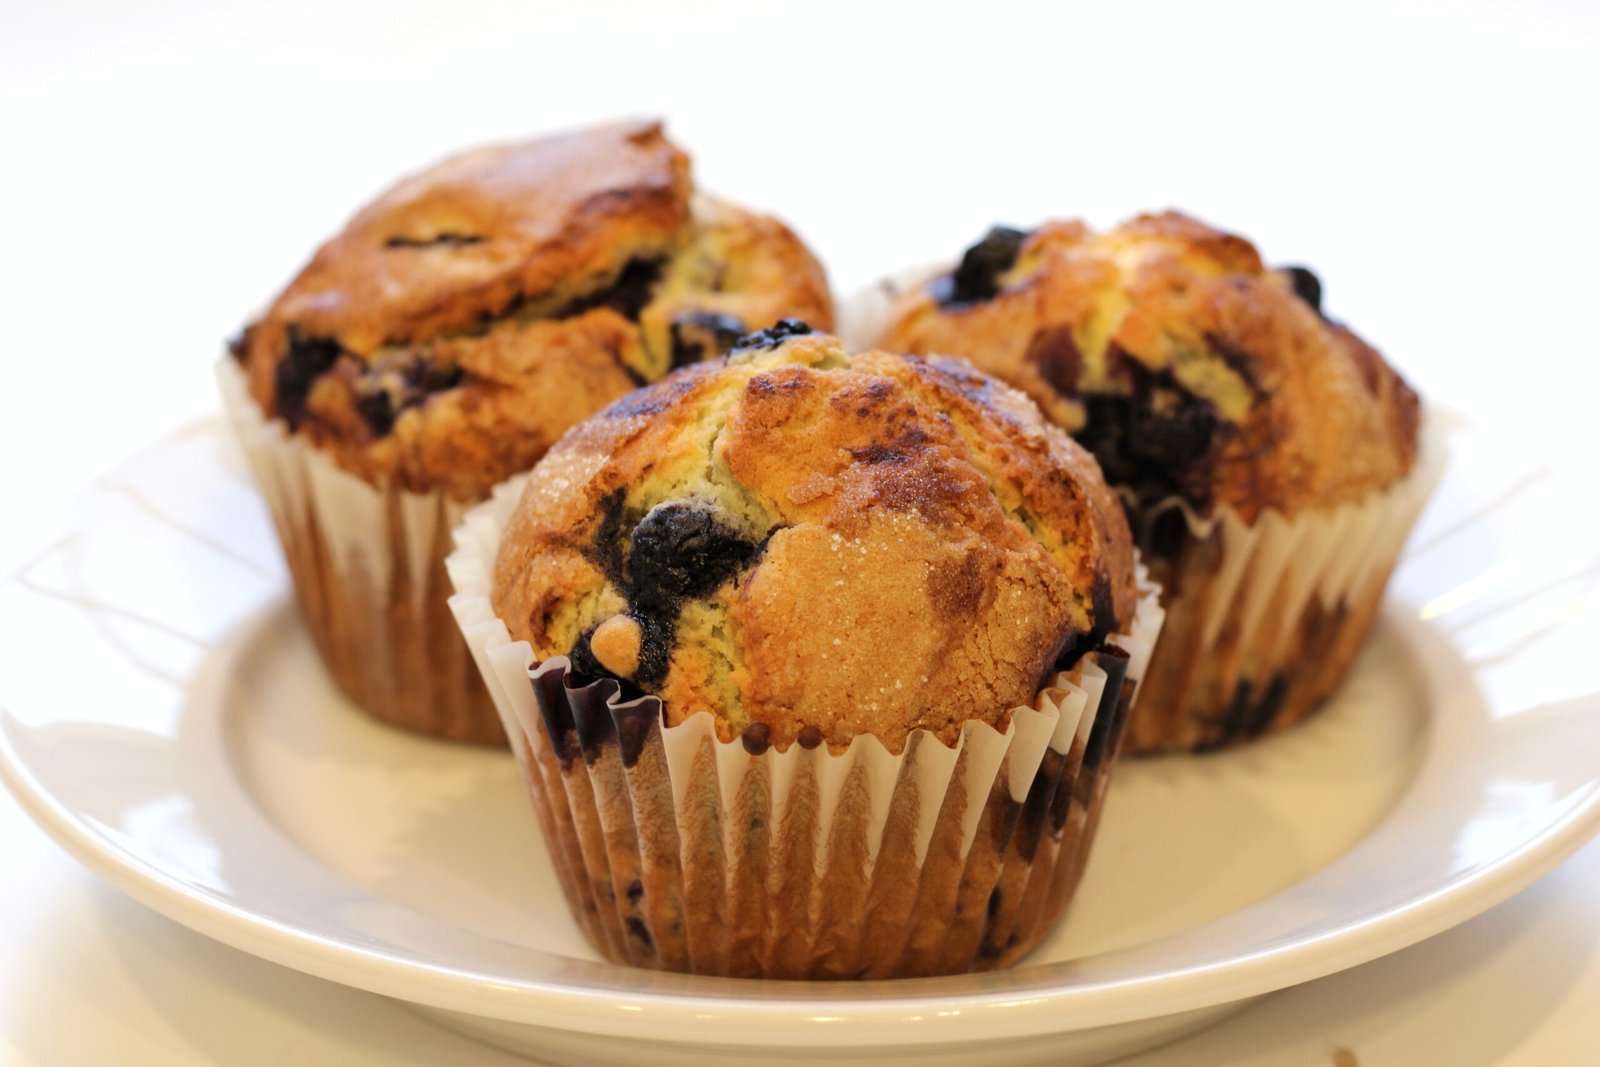 The Ritz-Carlton’s Blueberry Muffins: A Delicious Recipe to Try